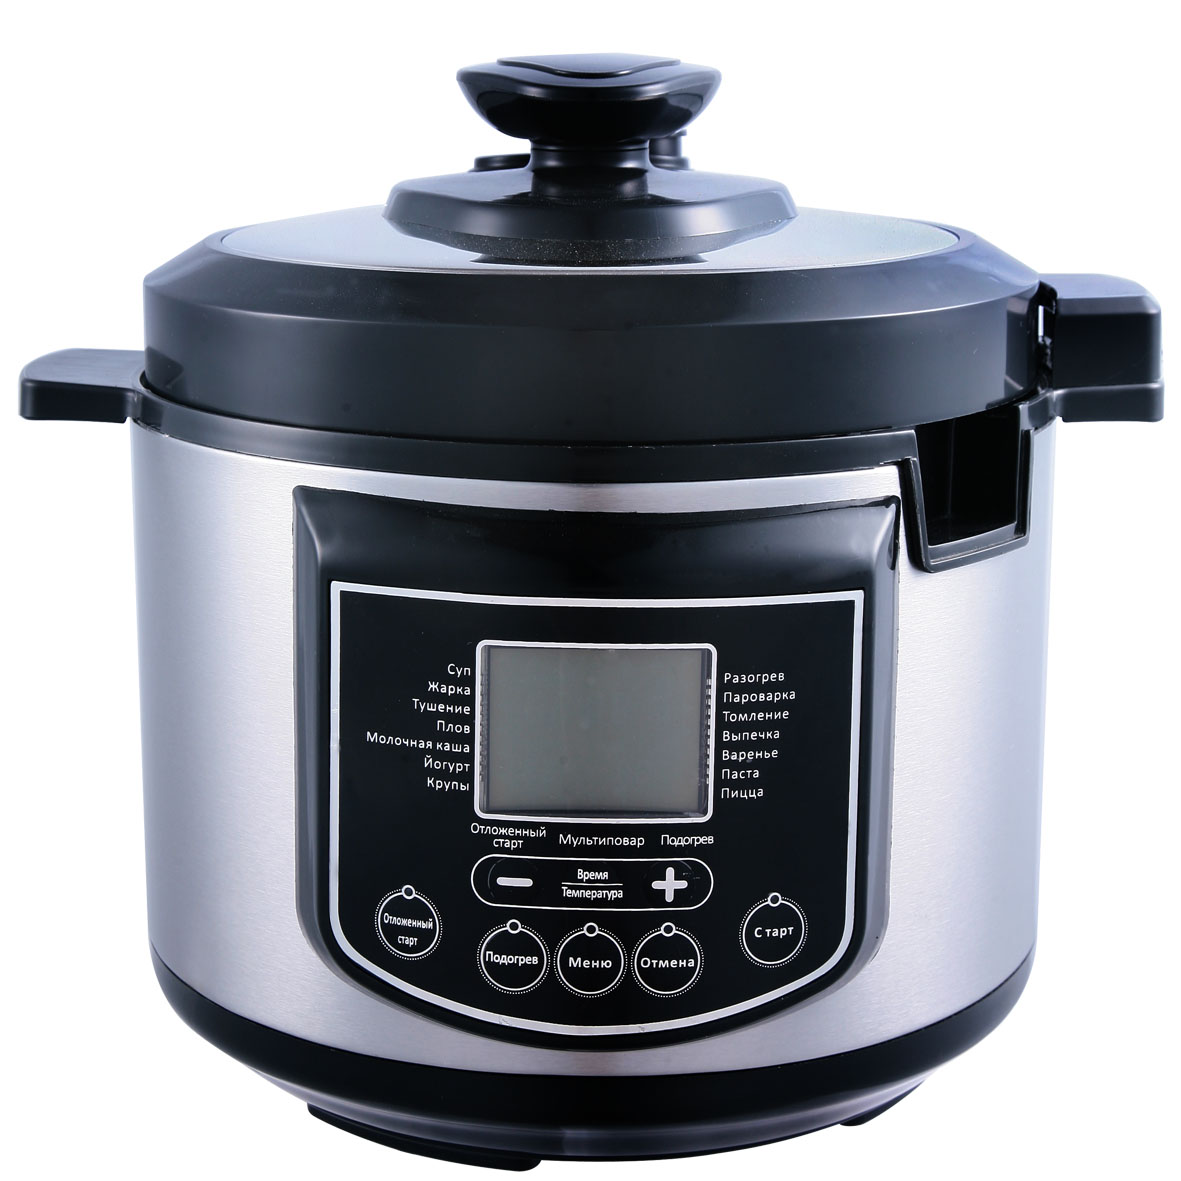 Hot sale 4L/5L/6L North America standard stainless steel electrical pressure cooker kitchen appliances